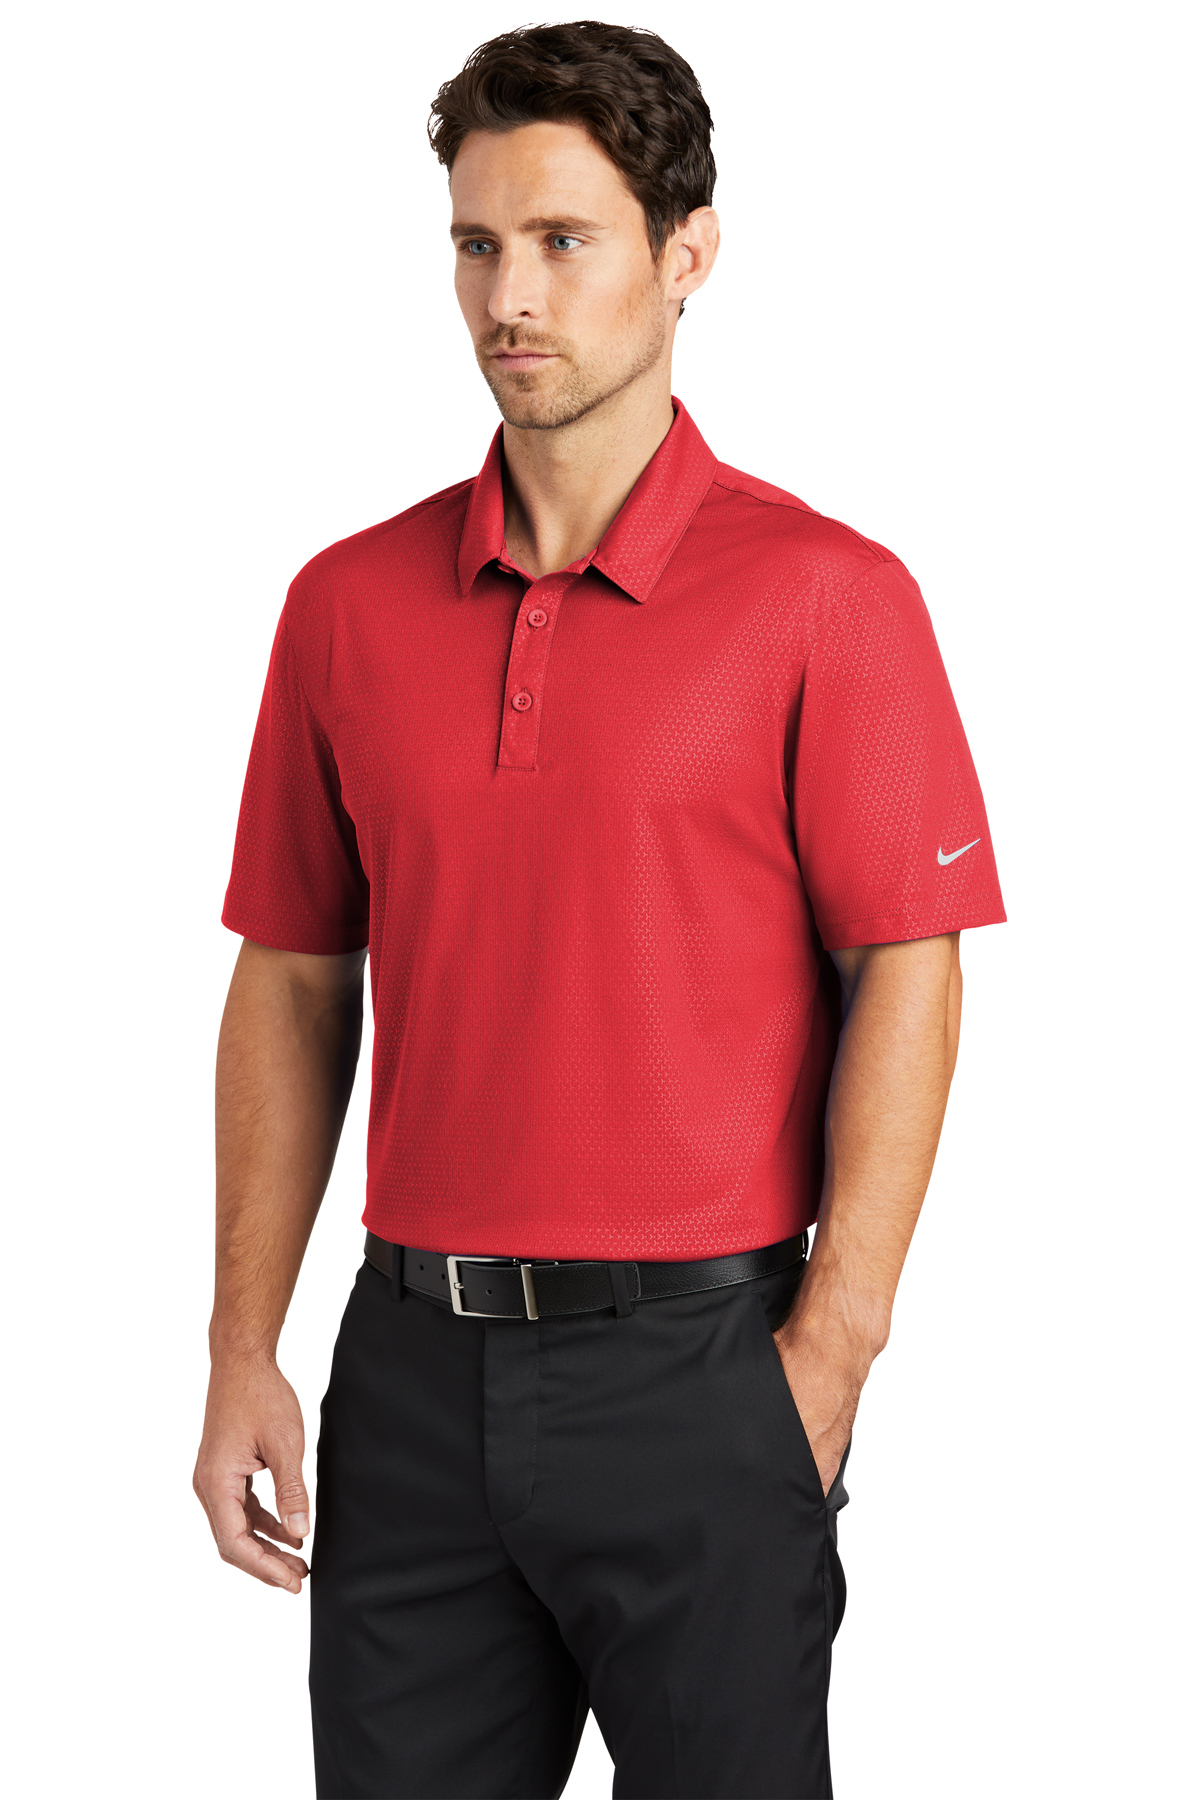 Nike Dri-FIT Embossed Tri-Blade Polo | Product | Online Apparel Market